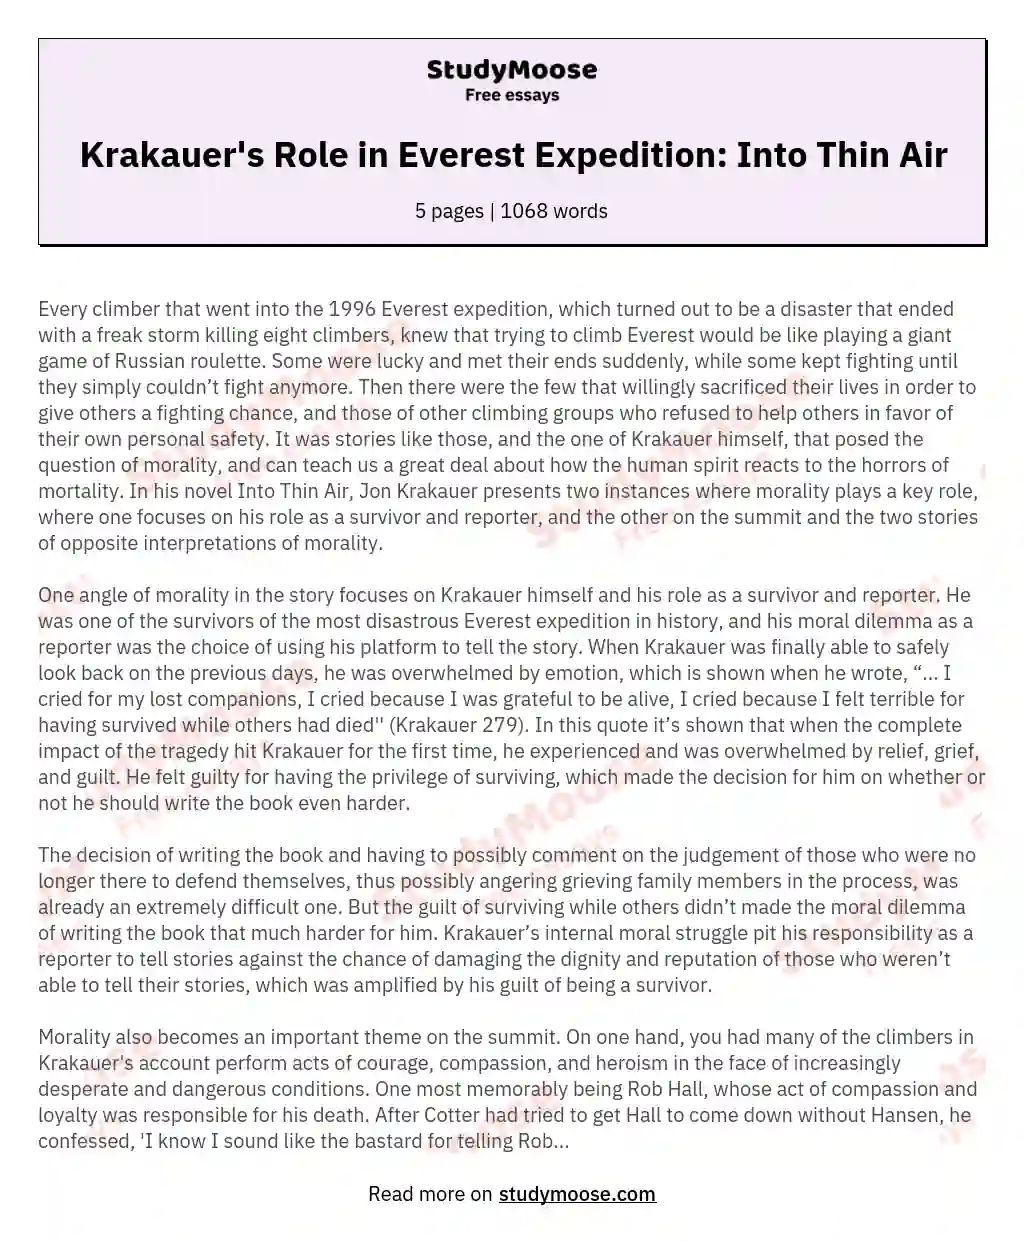 Krakauer's Role in Everest Expedition: Into Thin Air essay